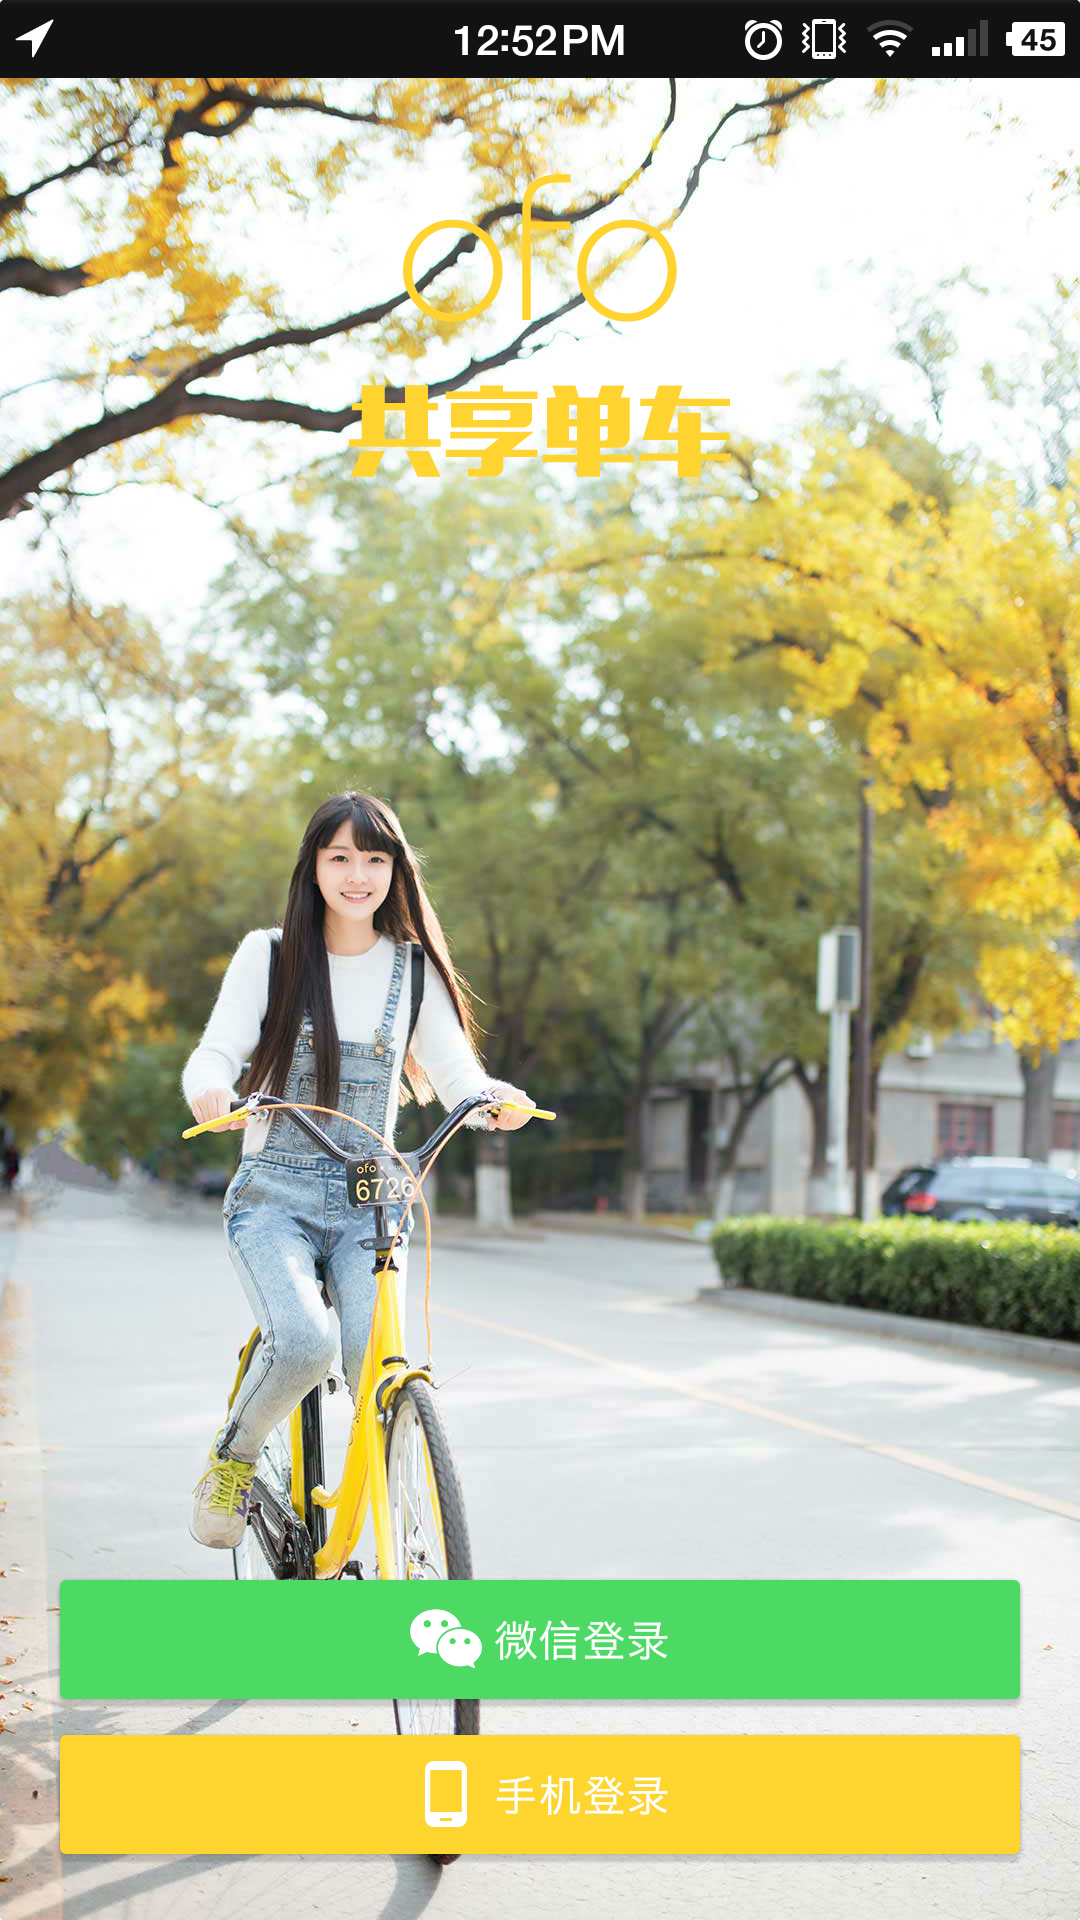 ofo bicycle下载|ofo bicycle手机版_最新ofo bicy